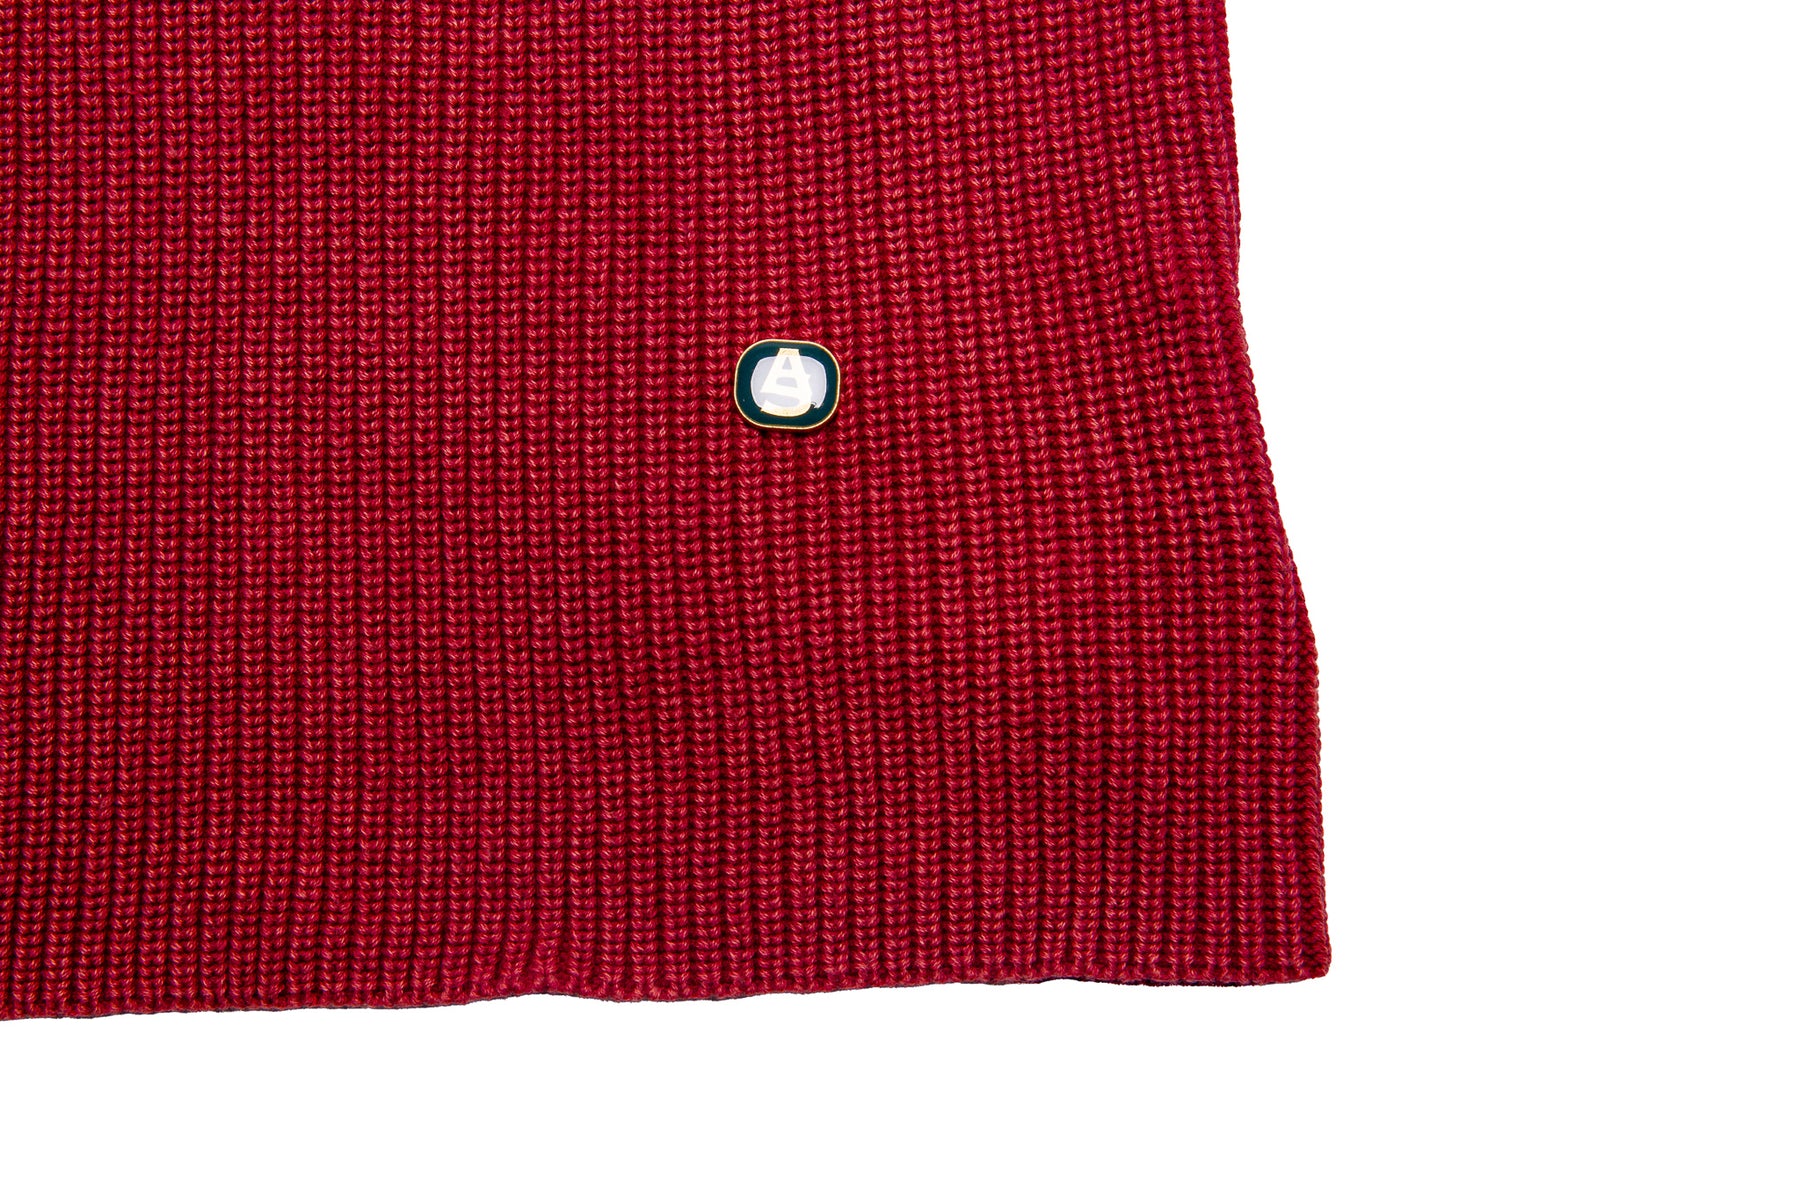 AlphaStyle Icacos Knitted Balaclava "Wine"